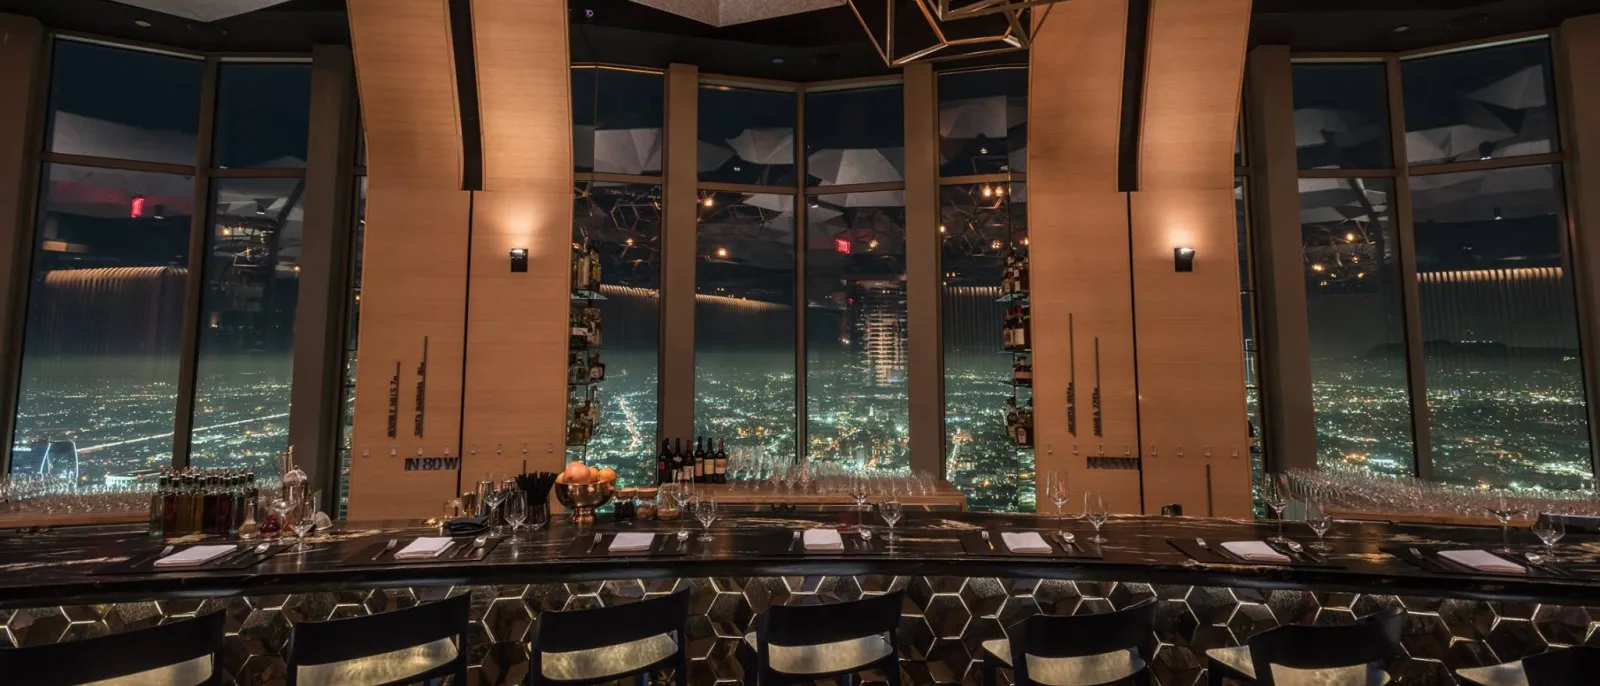 The Most Romantic Restaurants in Los Angeles | Discover Los Angeles